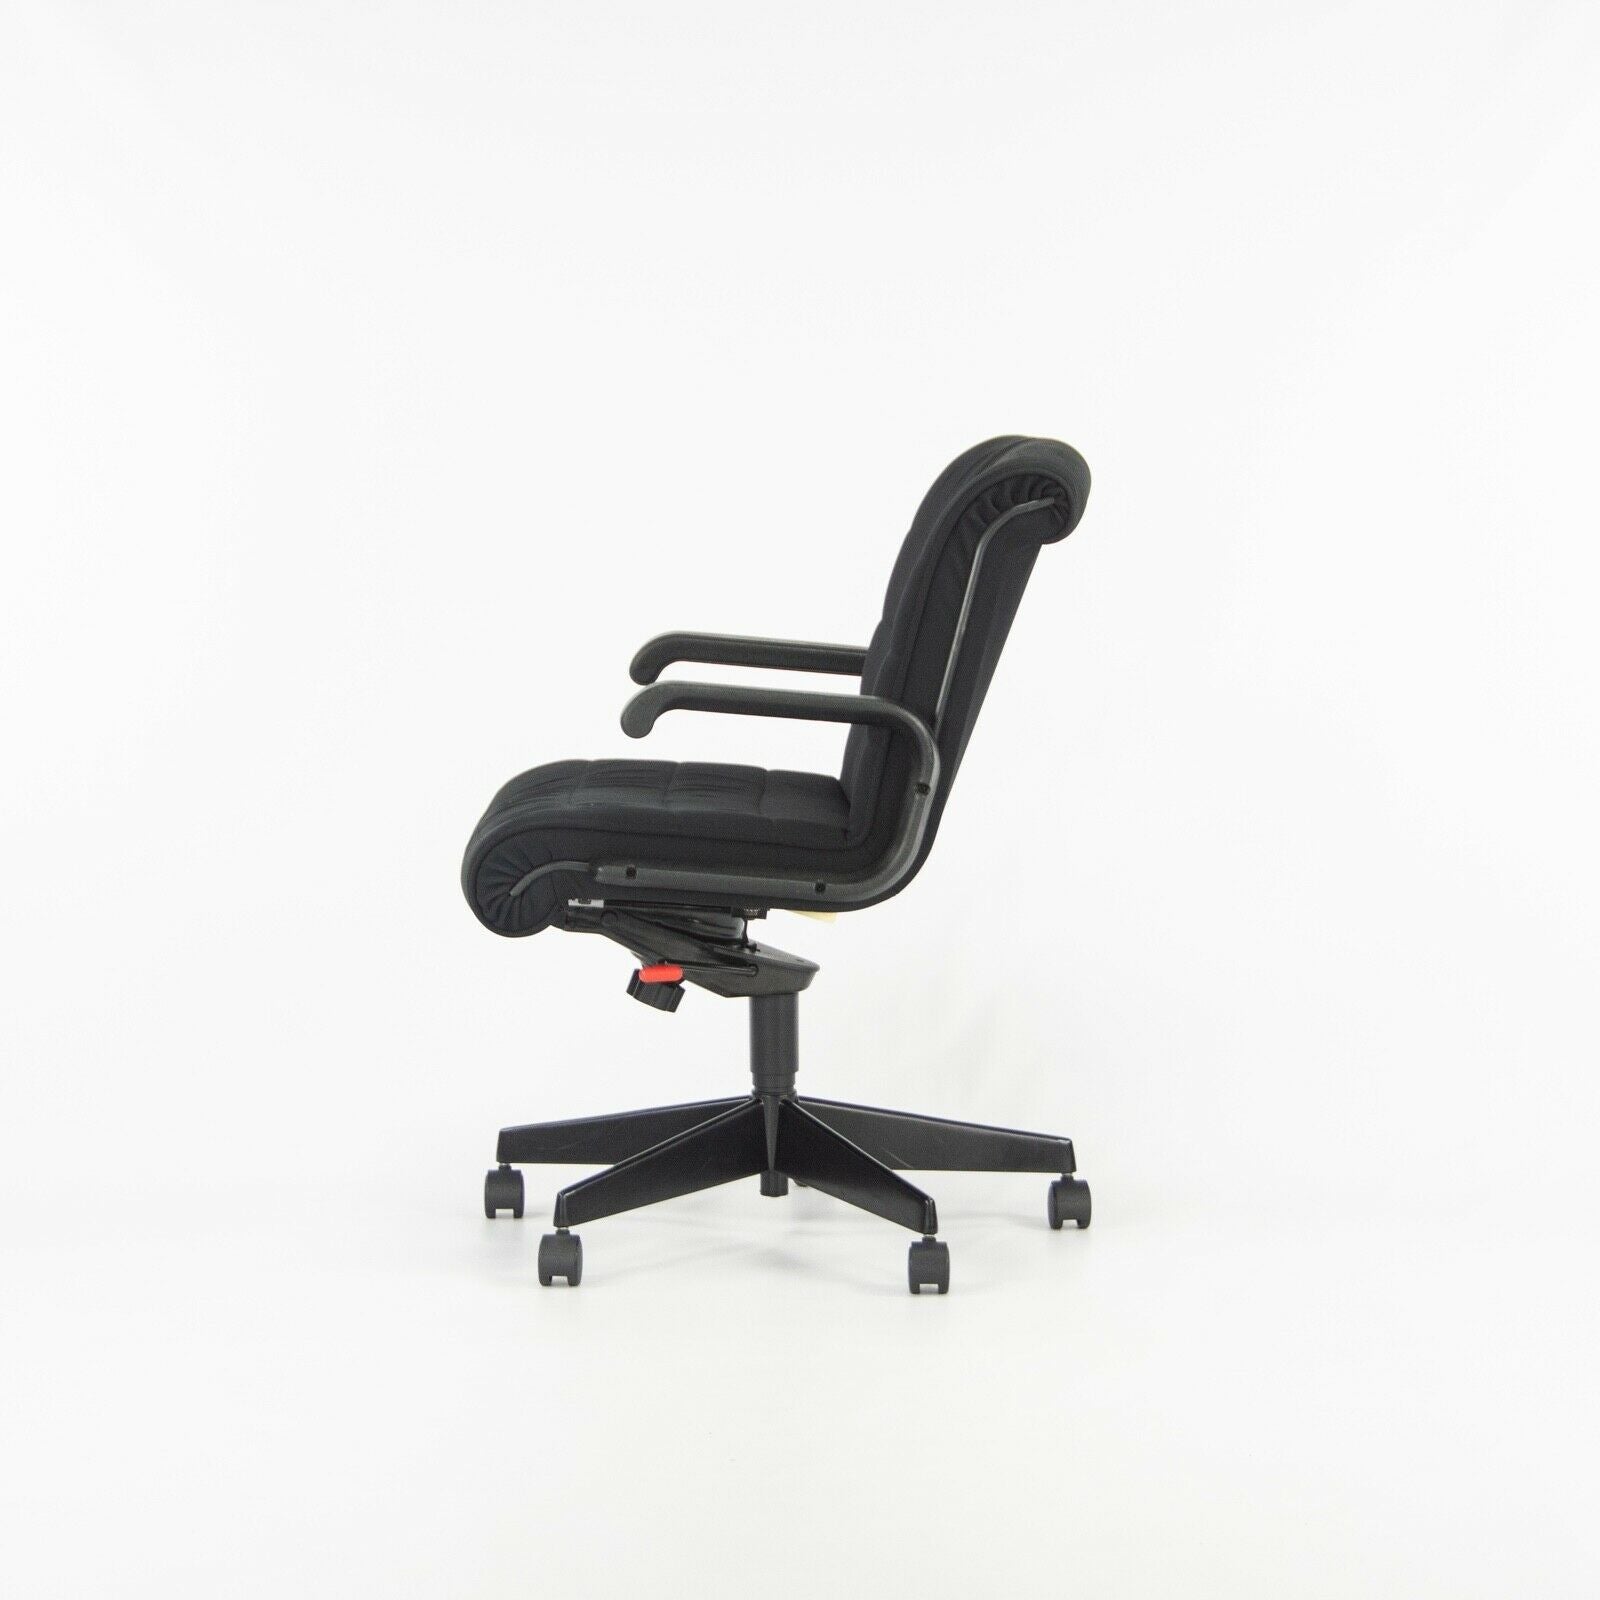 1990s Richard Sapper for Knoll Office / Desk Chair with Black Fabric and Frame